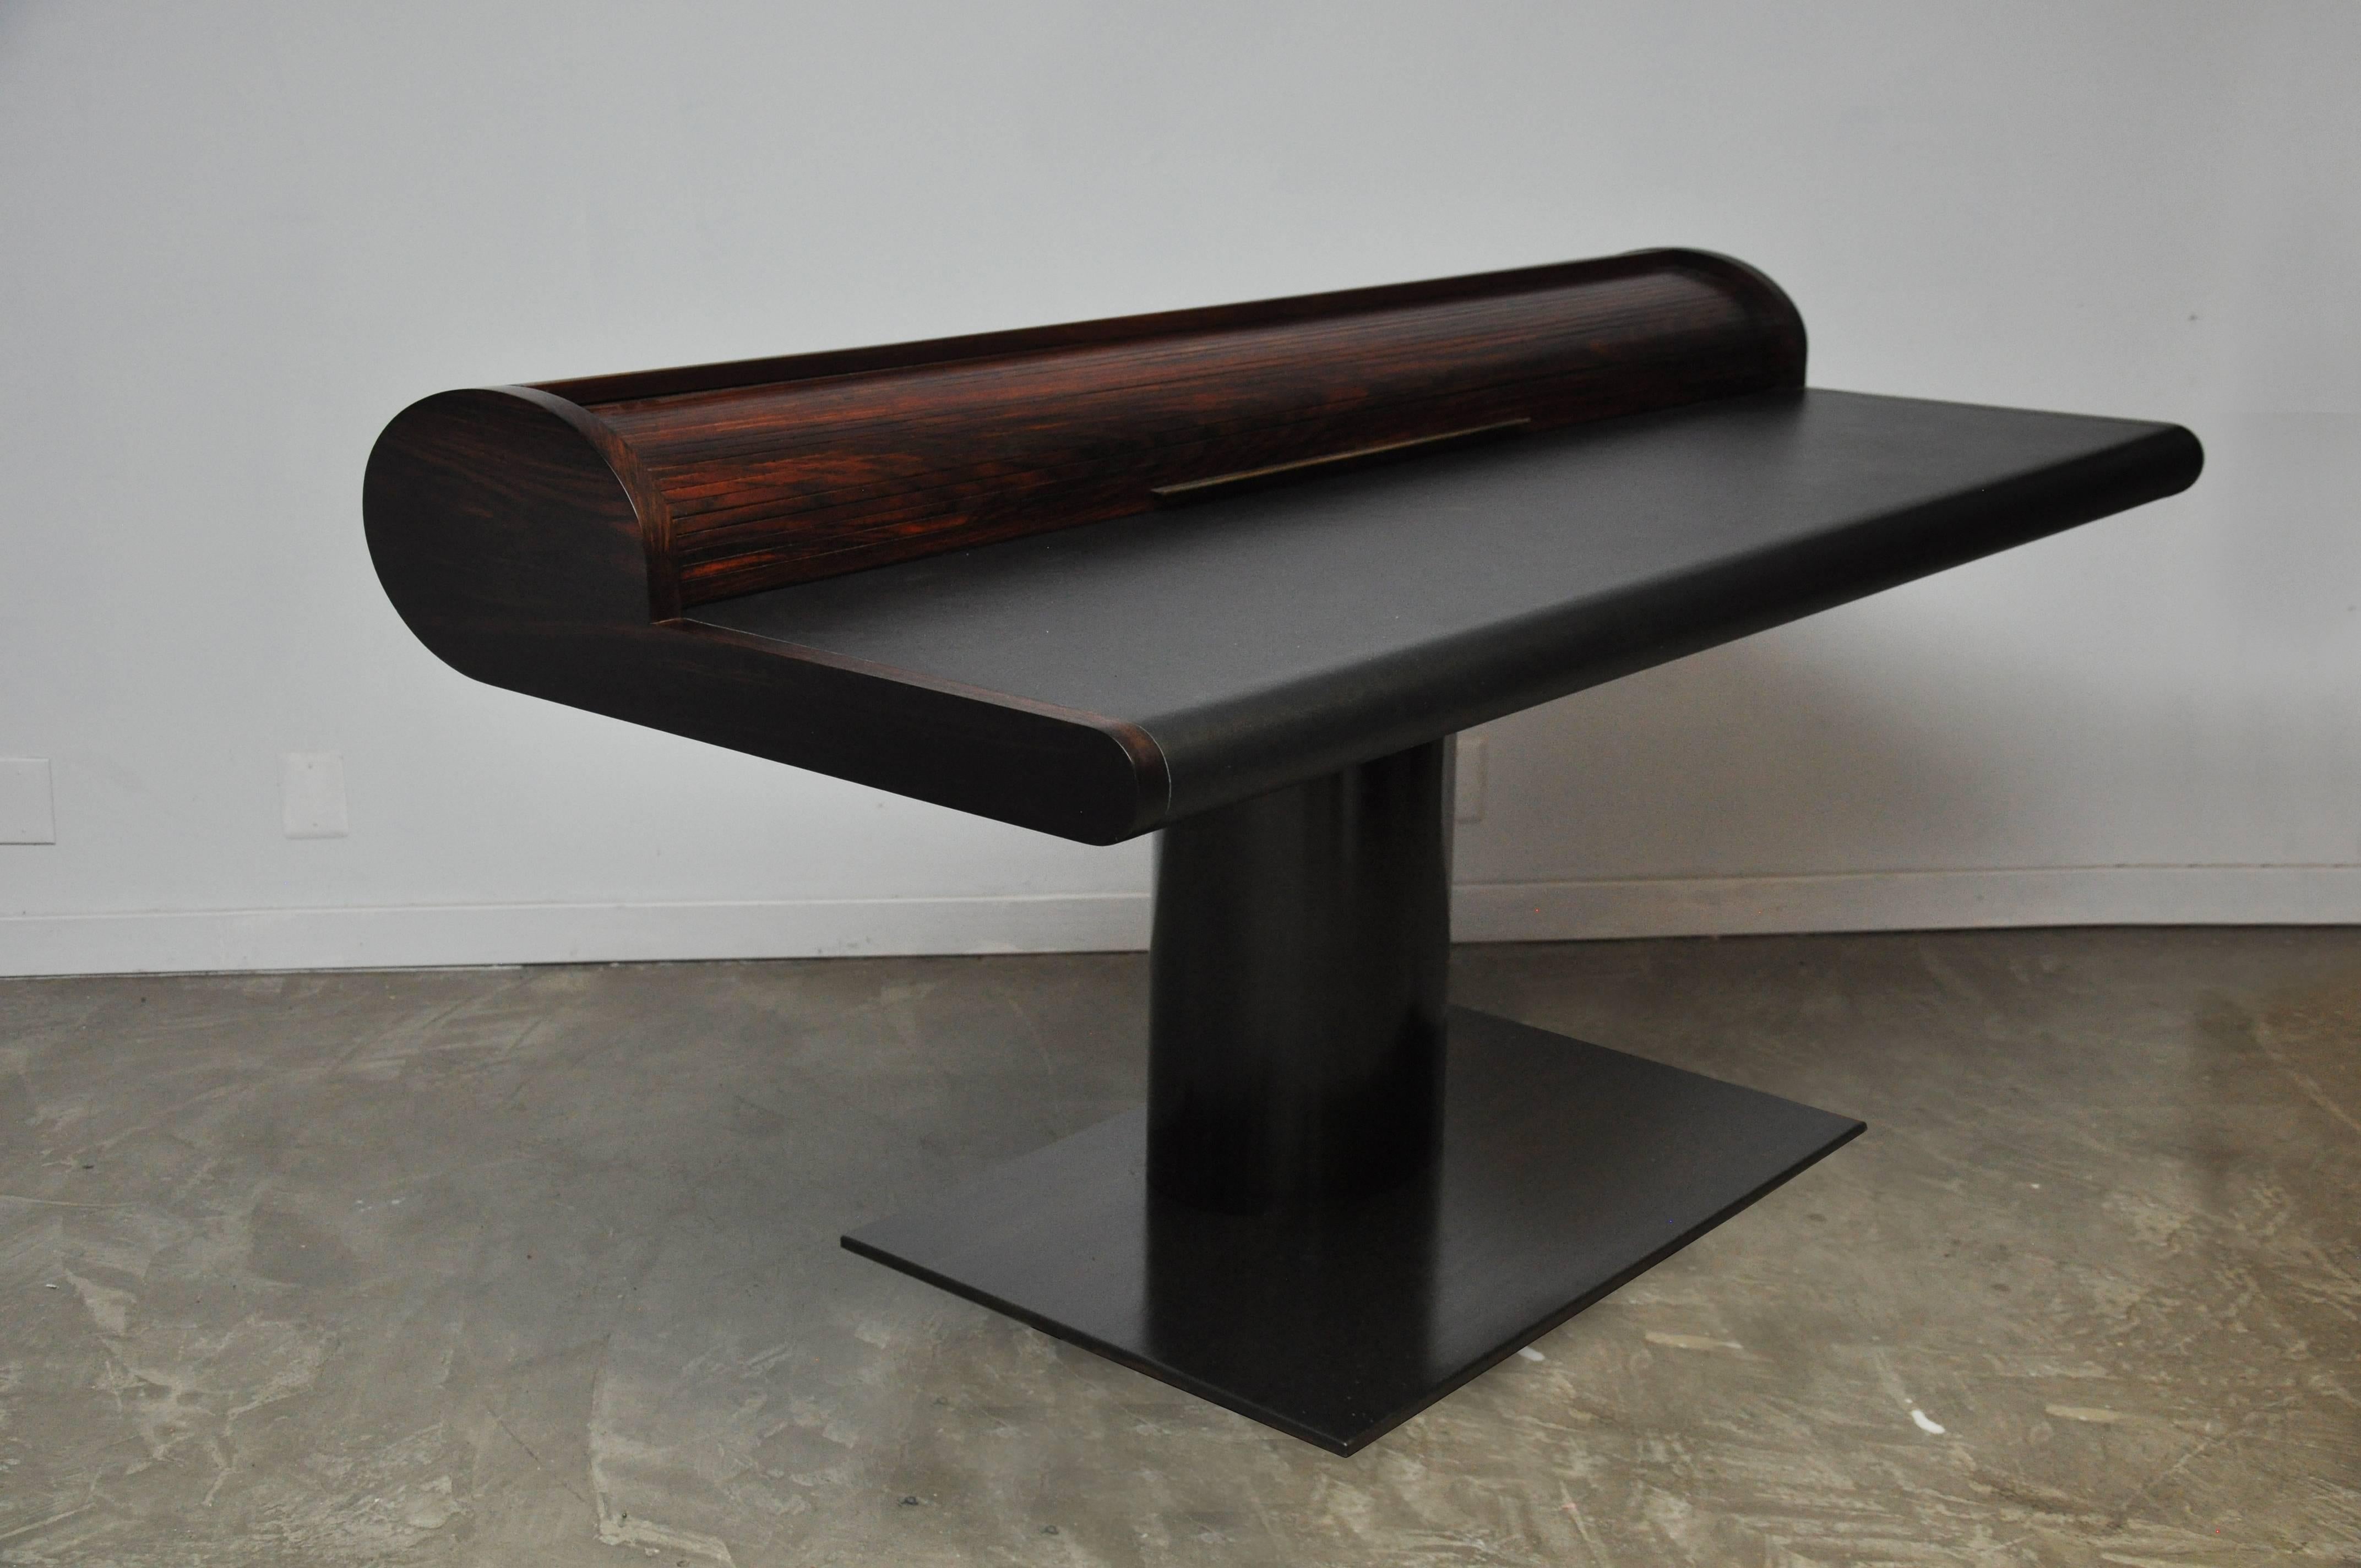 Desk by Edward Wormley for Dunbar. This custom ordered desk features a rosewood top, black leather wrapped surfaces, and floating on bronze pedestal base. Bronze details on desk throughout. The electronic panel behind the roll top has brand new